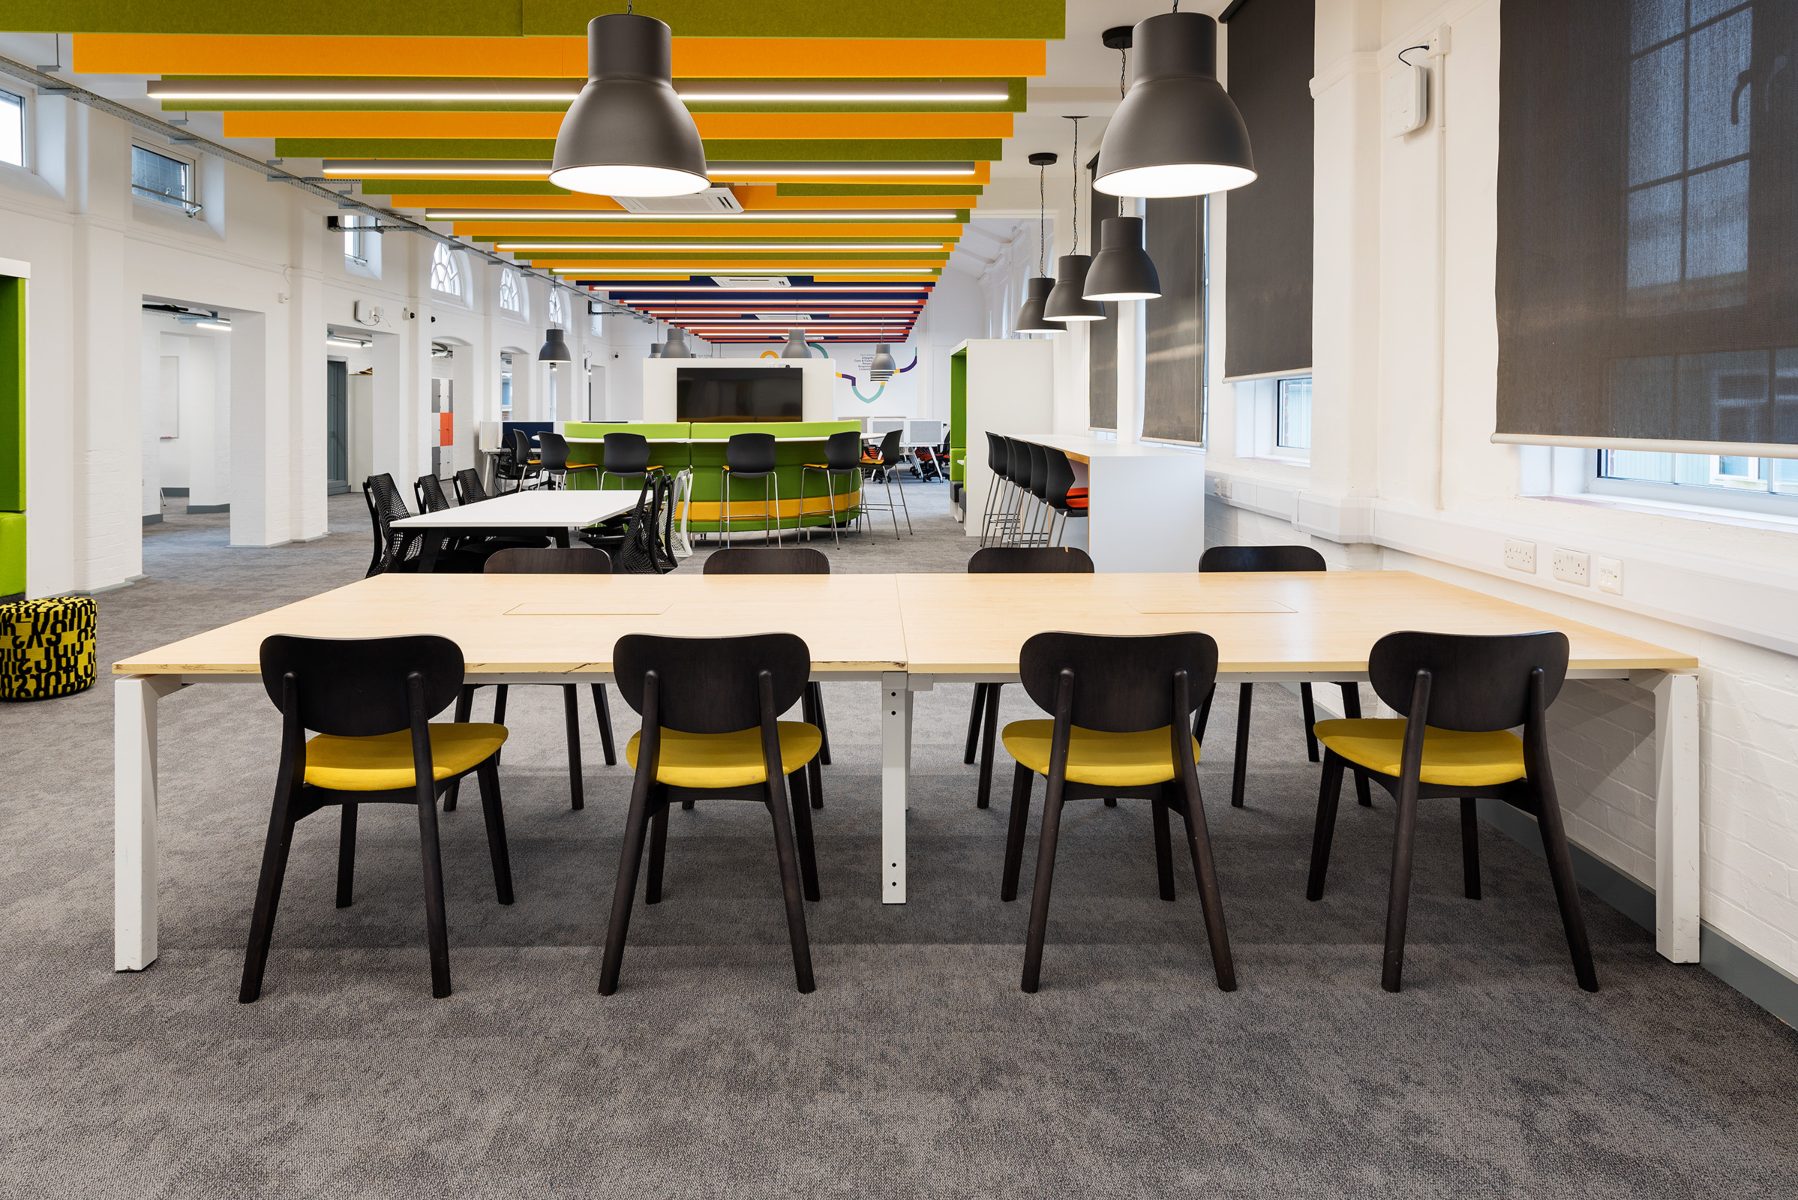 Why Interior Design is Important to School Environments